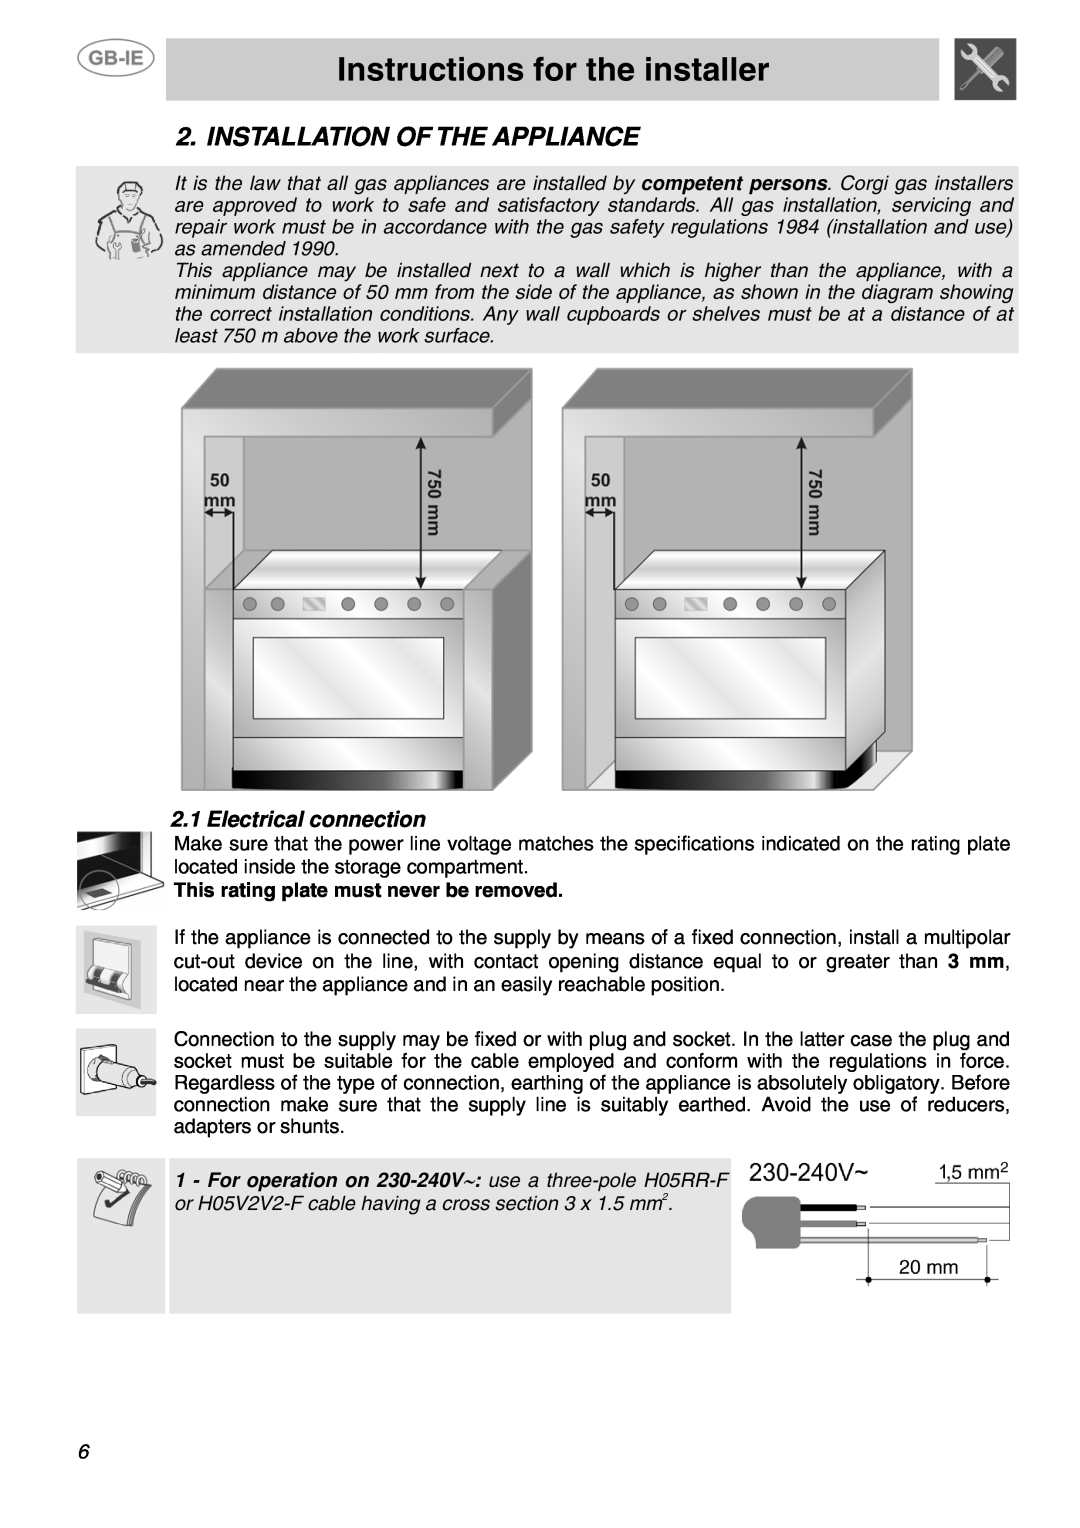 Smeg SUK81MBL5, SUK81MFX5, SUK81MFA5 Instructions for the installer, Installation Of The Appliance, Electrical connection 